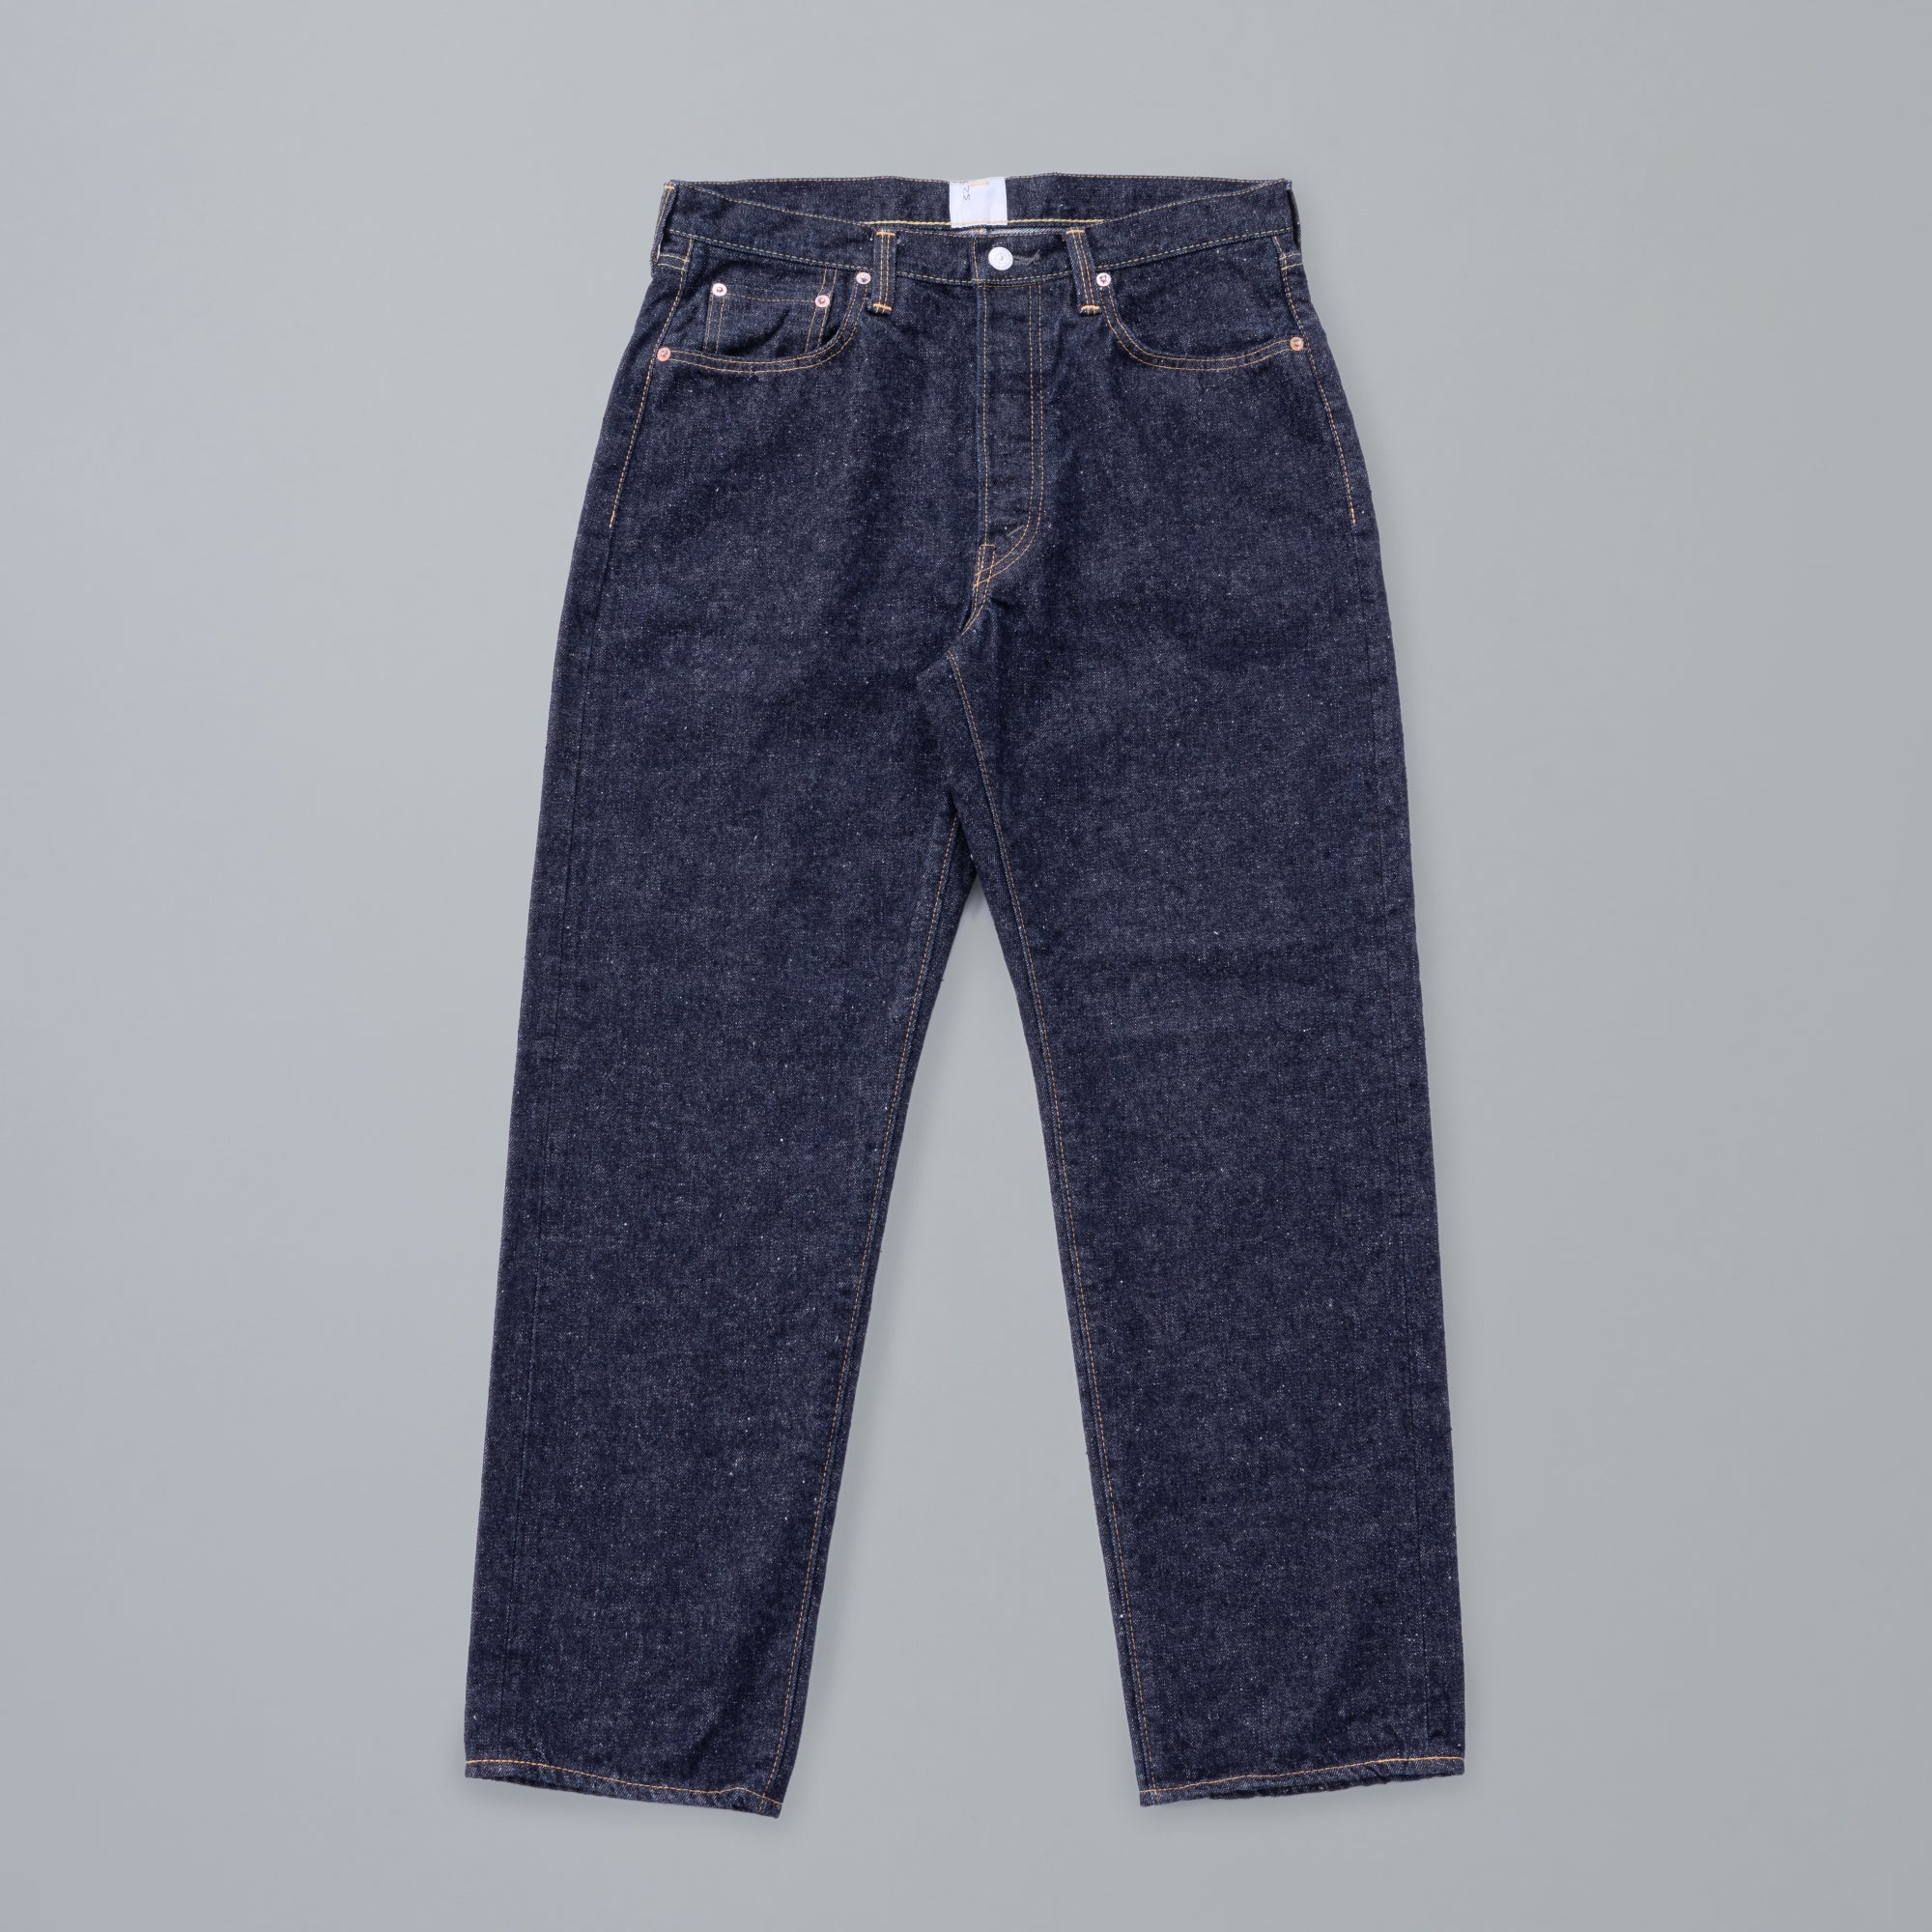 newmanual 017 LV 61's TAPERED JEANS - デニム/ジーンズ